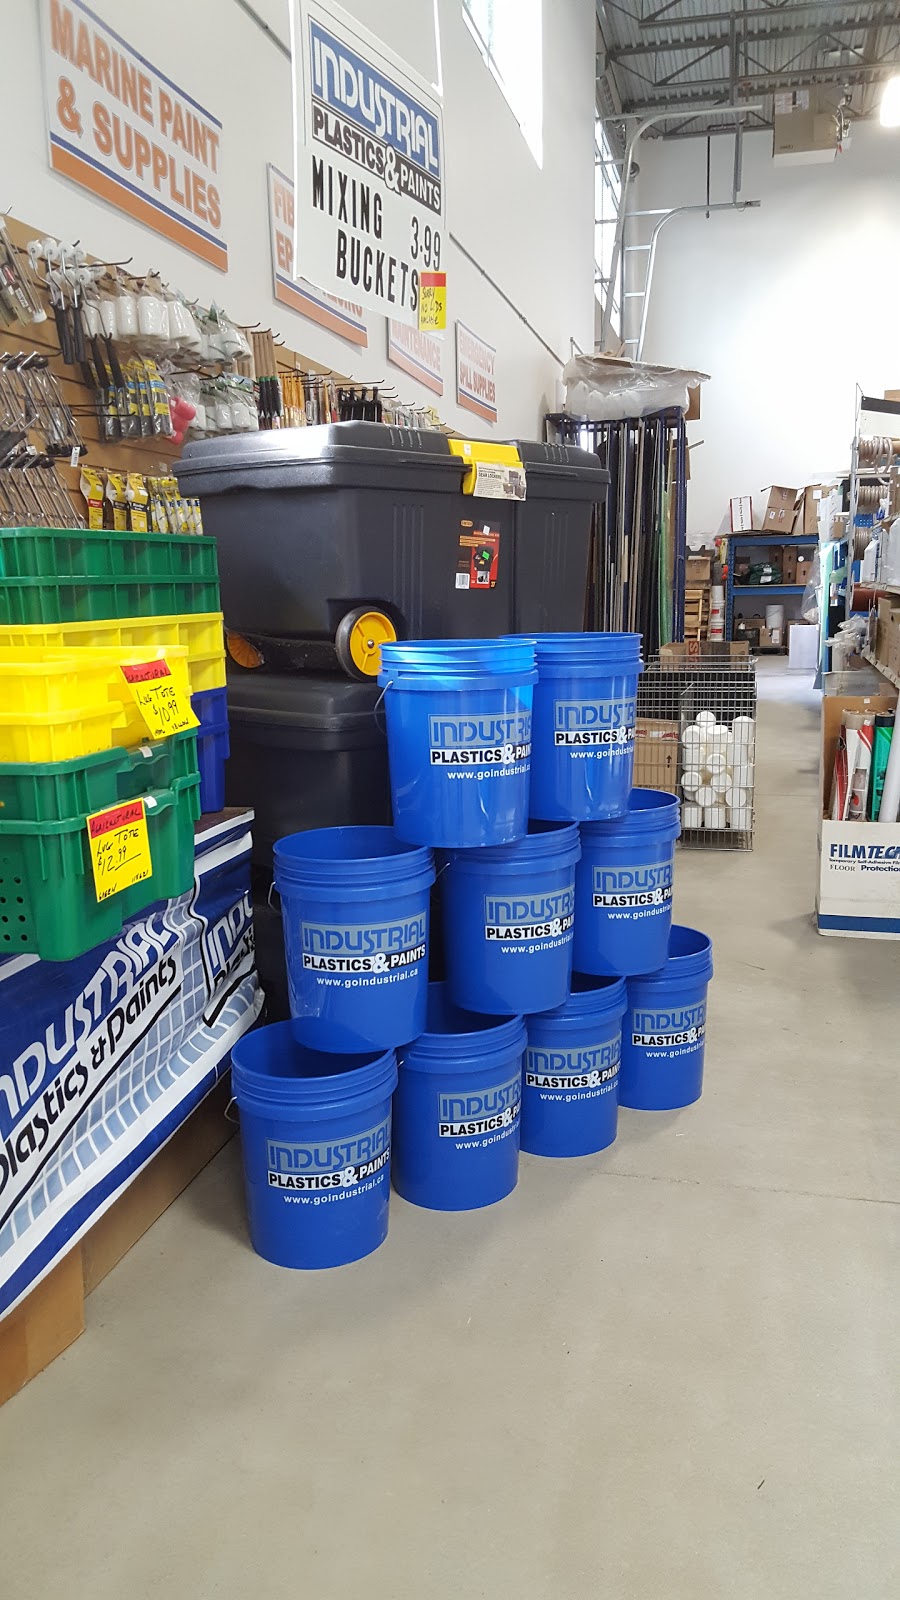 Industrial Plastics and Paints | hardware store | 3105-575 Seaborne Ave, Port Coquitlam, BC V3B 0M3, Canada | 6049454711 OR +1 604-945-4711